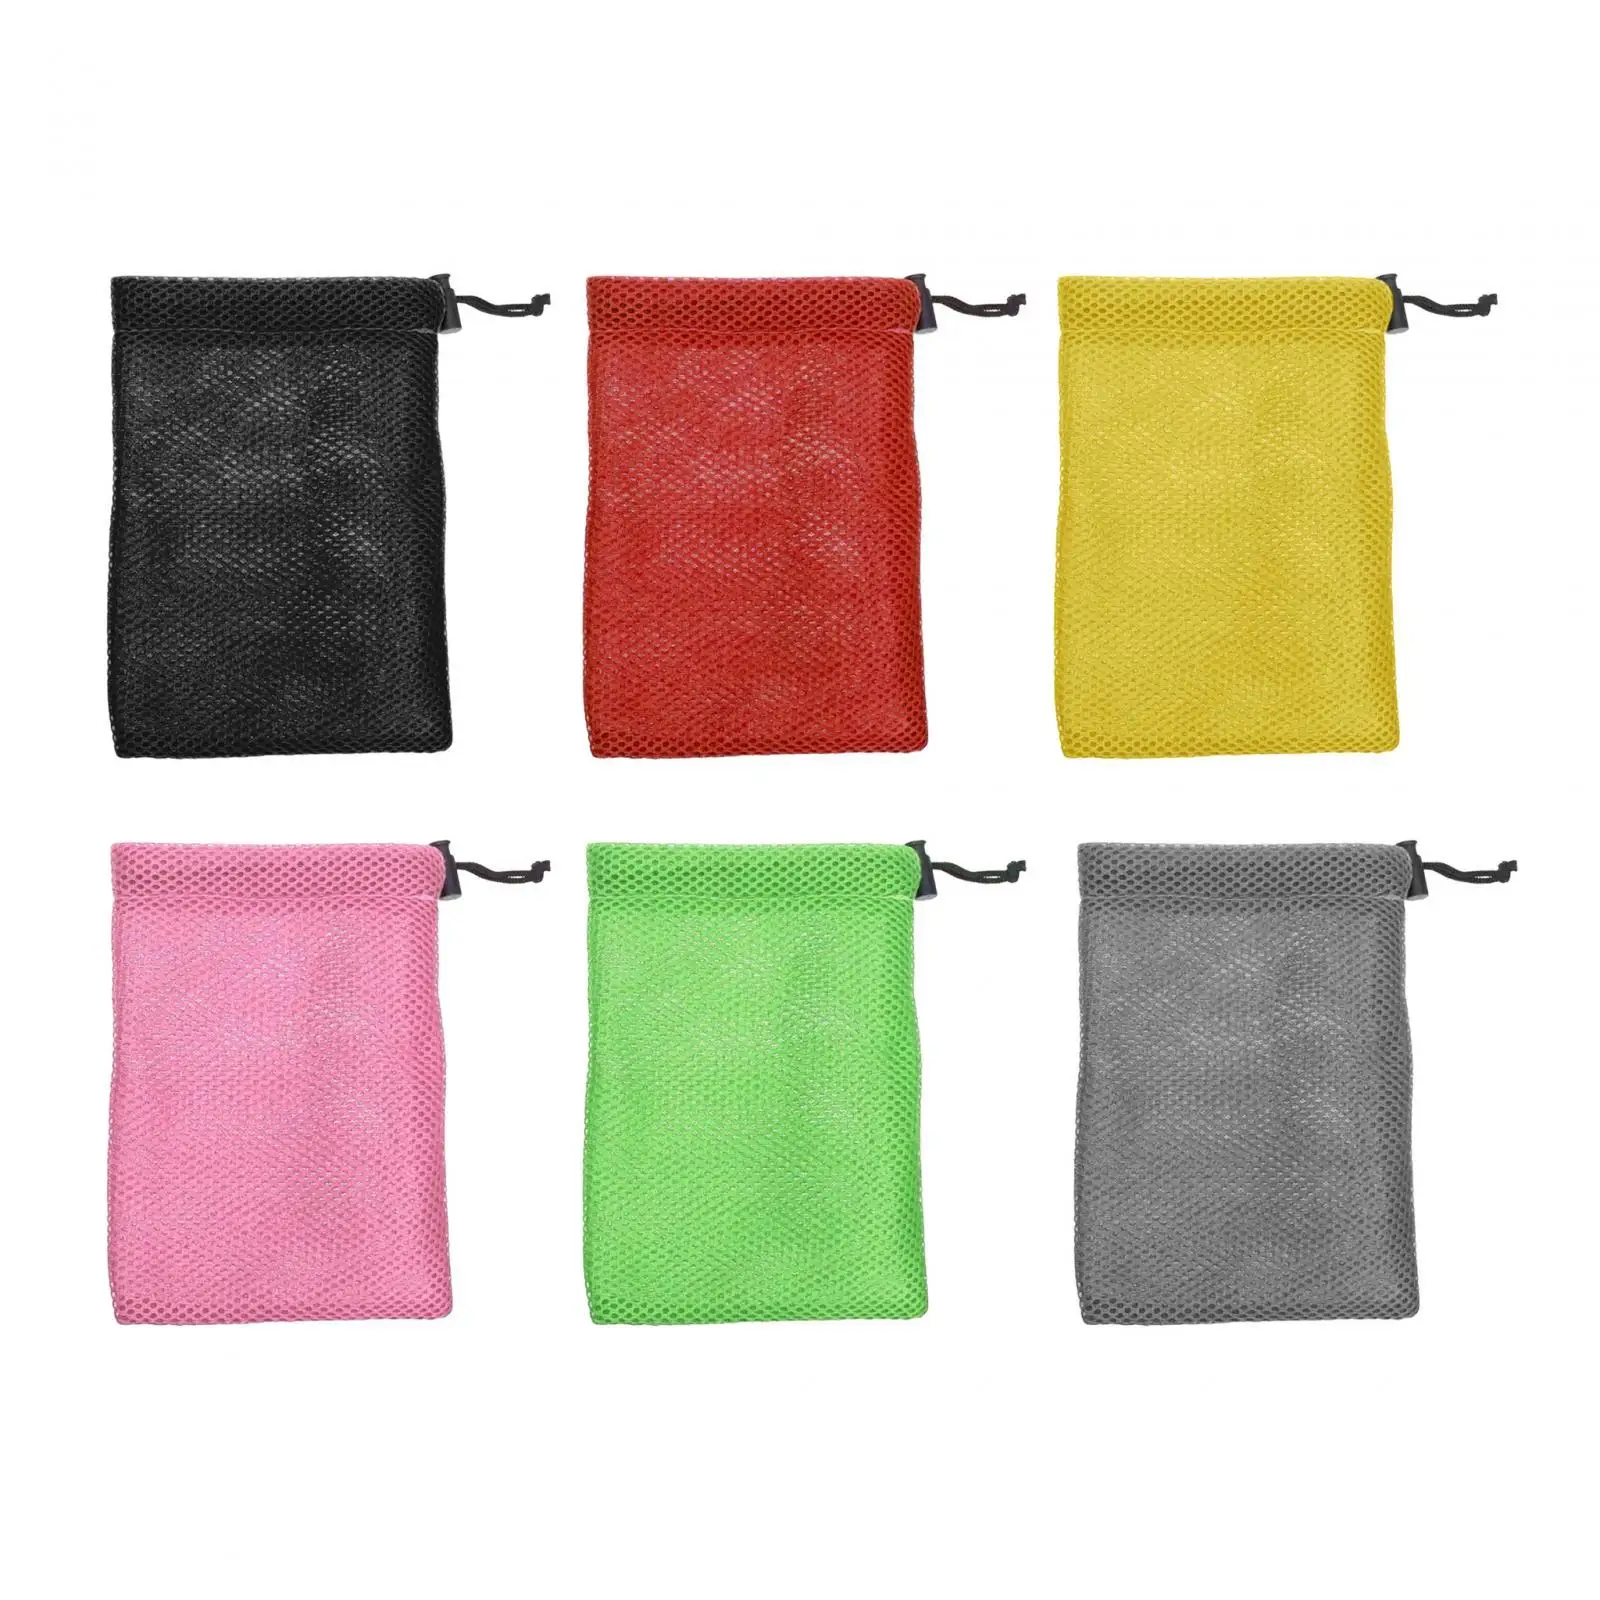 Multifunctional Mesh Small Drawstring Storage Bag for Cosmetics, Toy Collection,